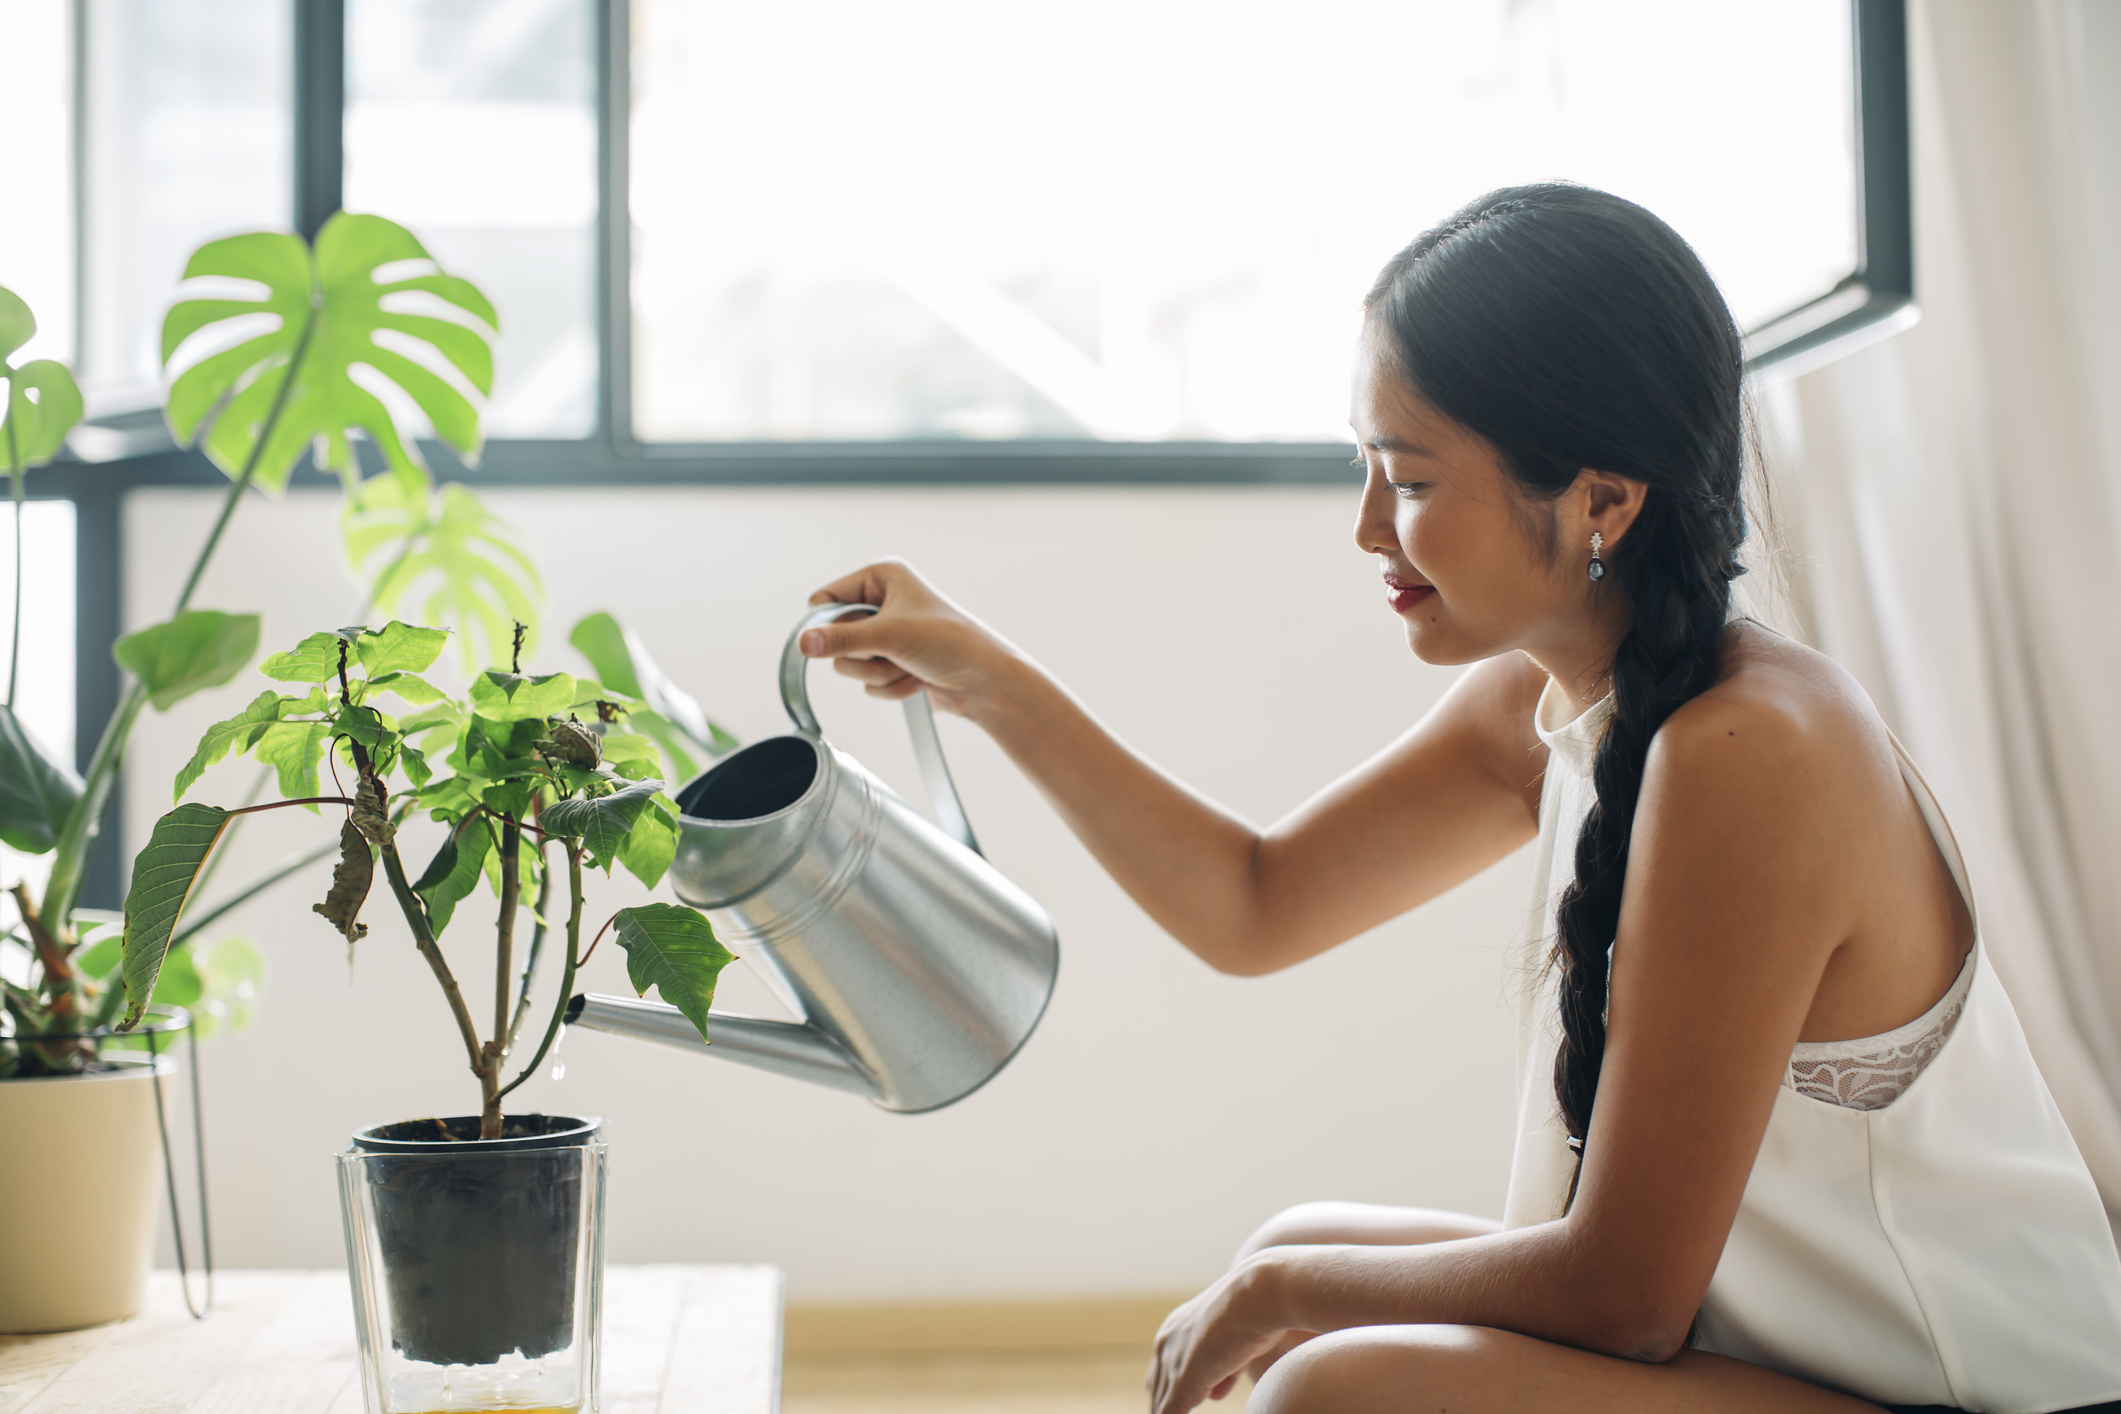 What Green Thumbs Need to Know About Shopping for Indoor Plants Online